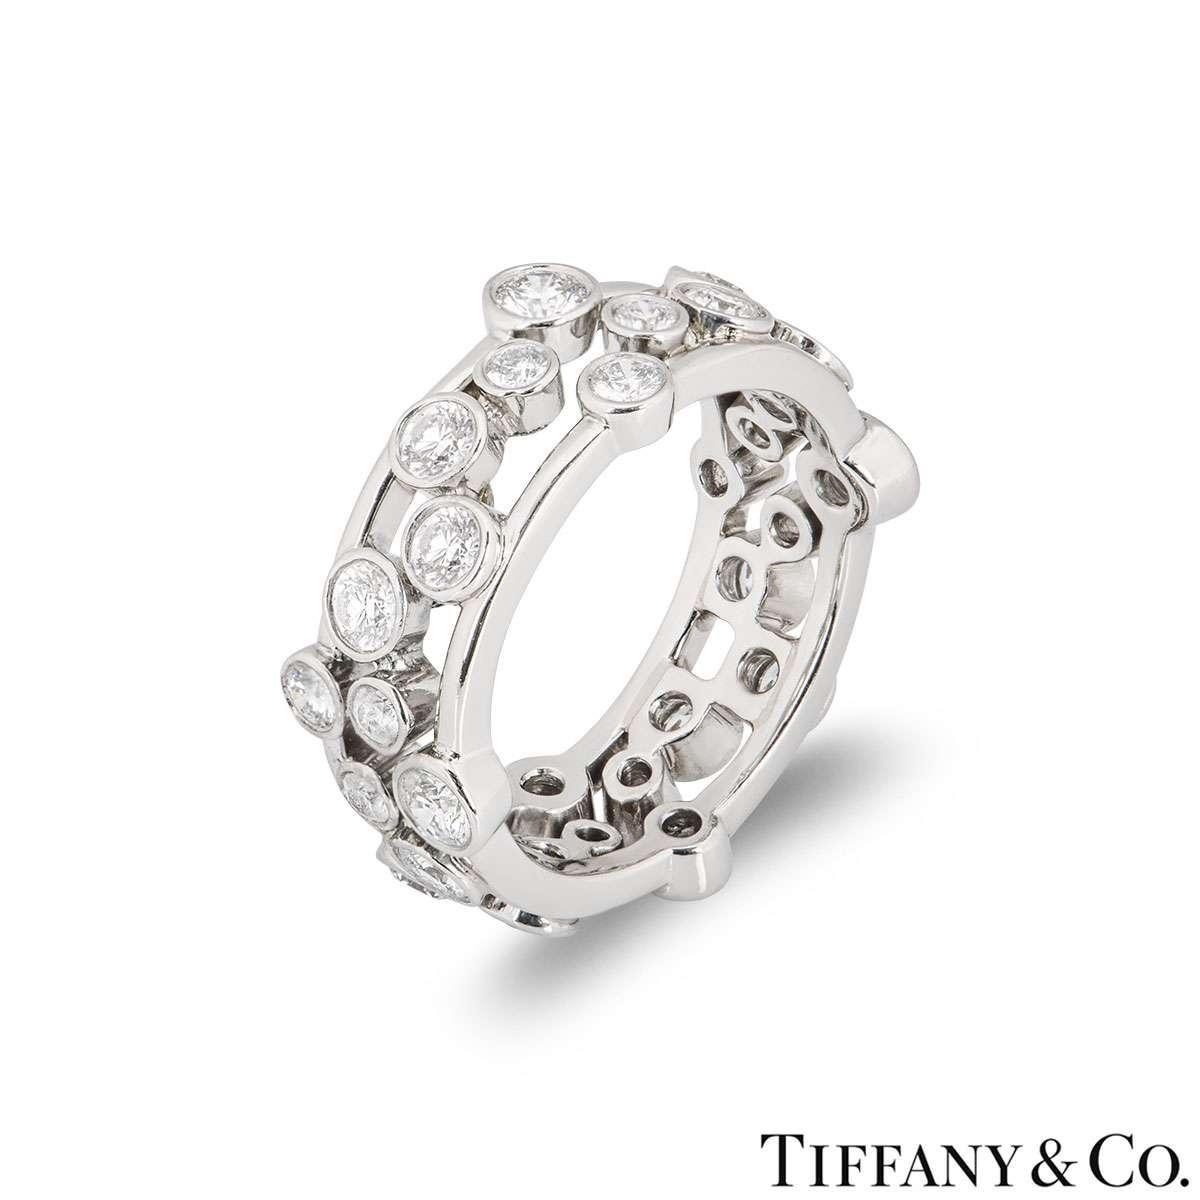 A platinum diamond ring from the Bubble collection by Tiffany & Co. The ring is set with round brilliant cut rubover set diamonds varying in size. The diamonds have an approximate total weight of 1.60ct. The ring measures 8mm in width and is a size